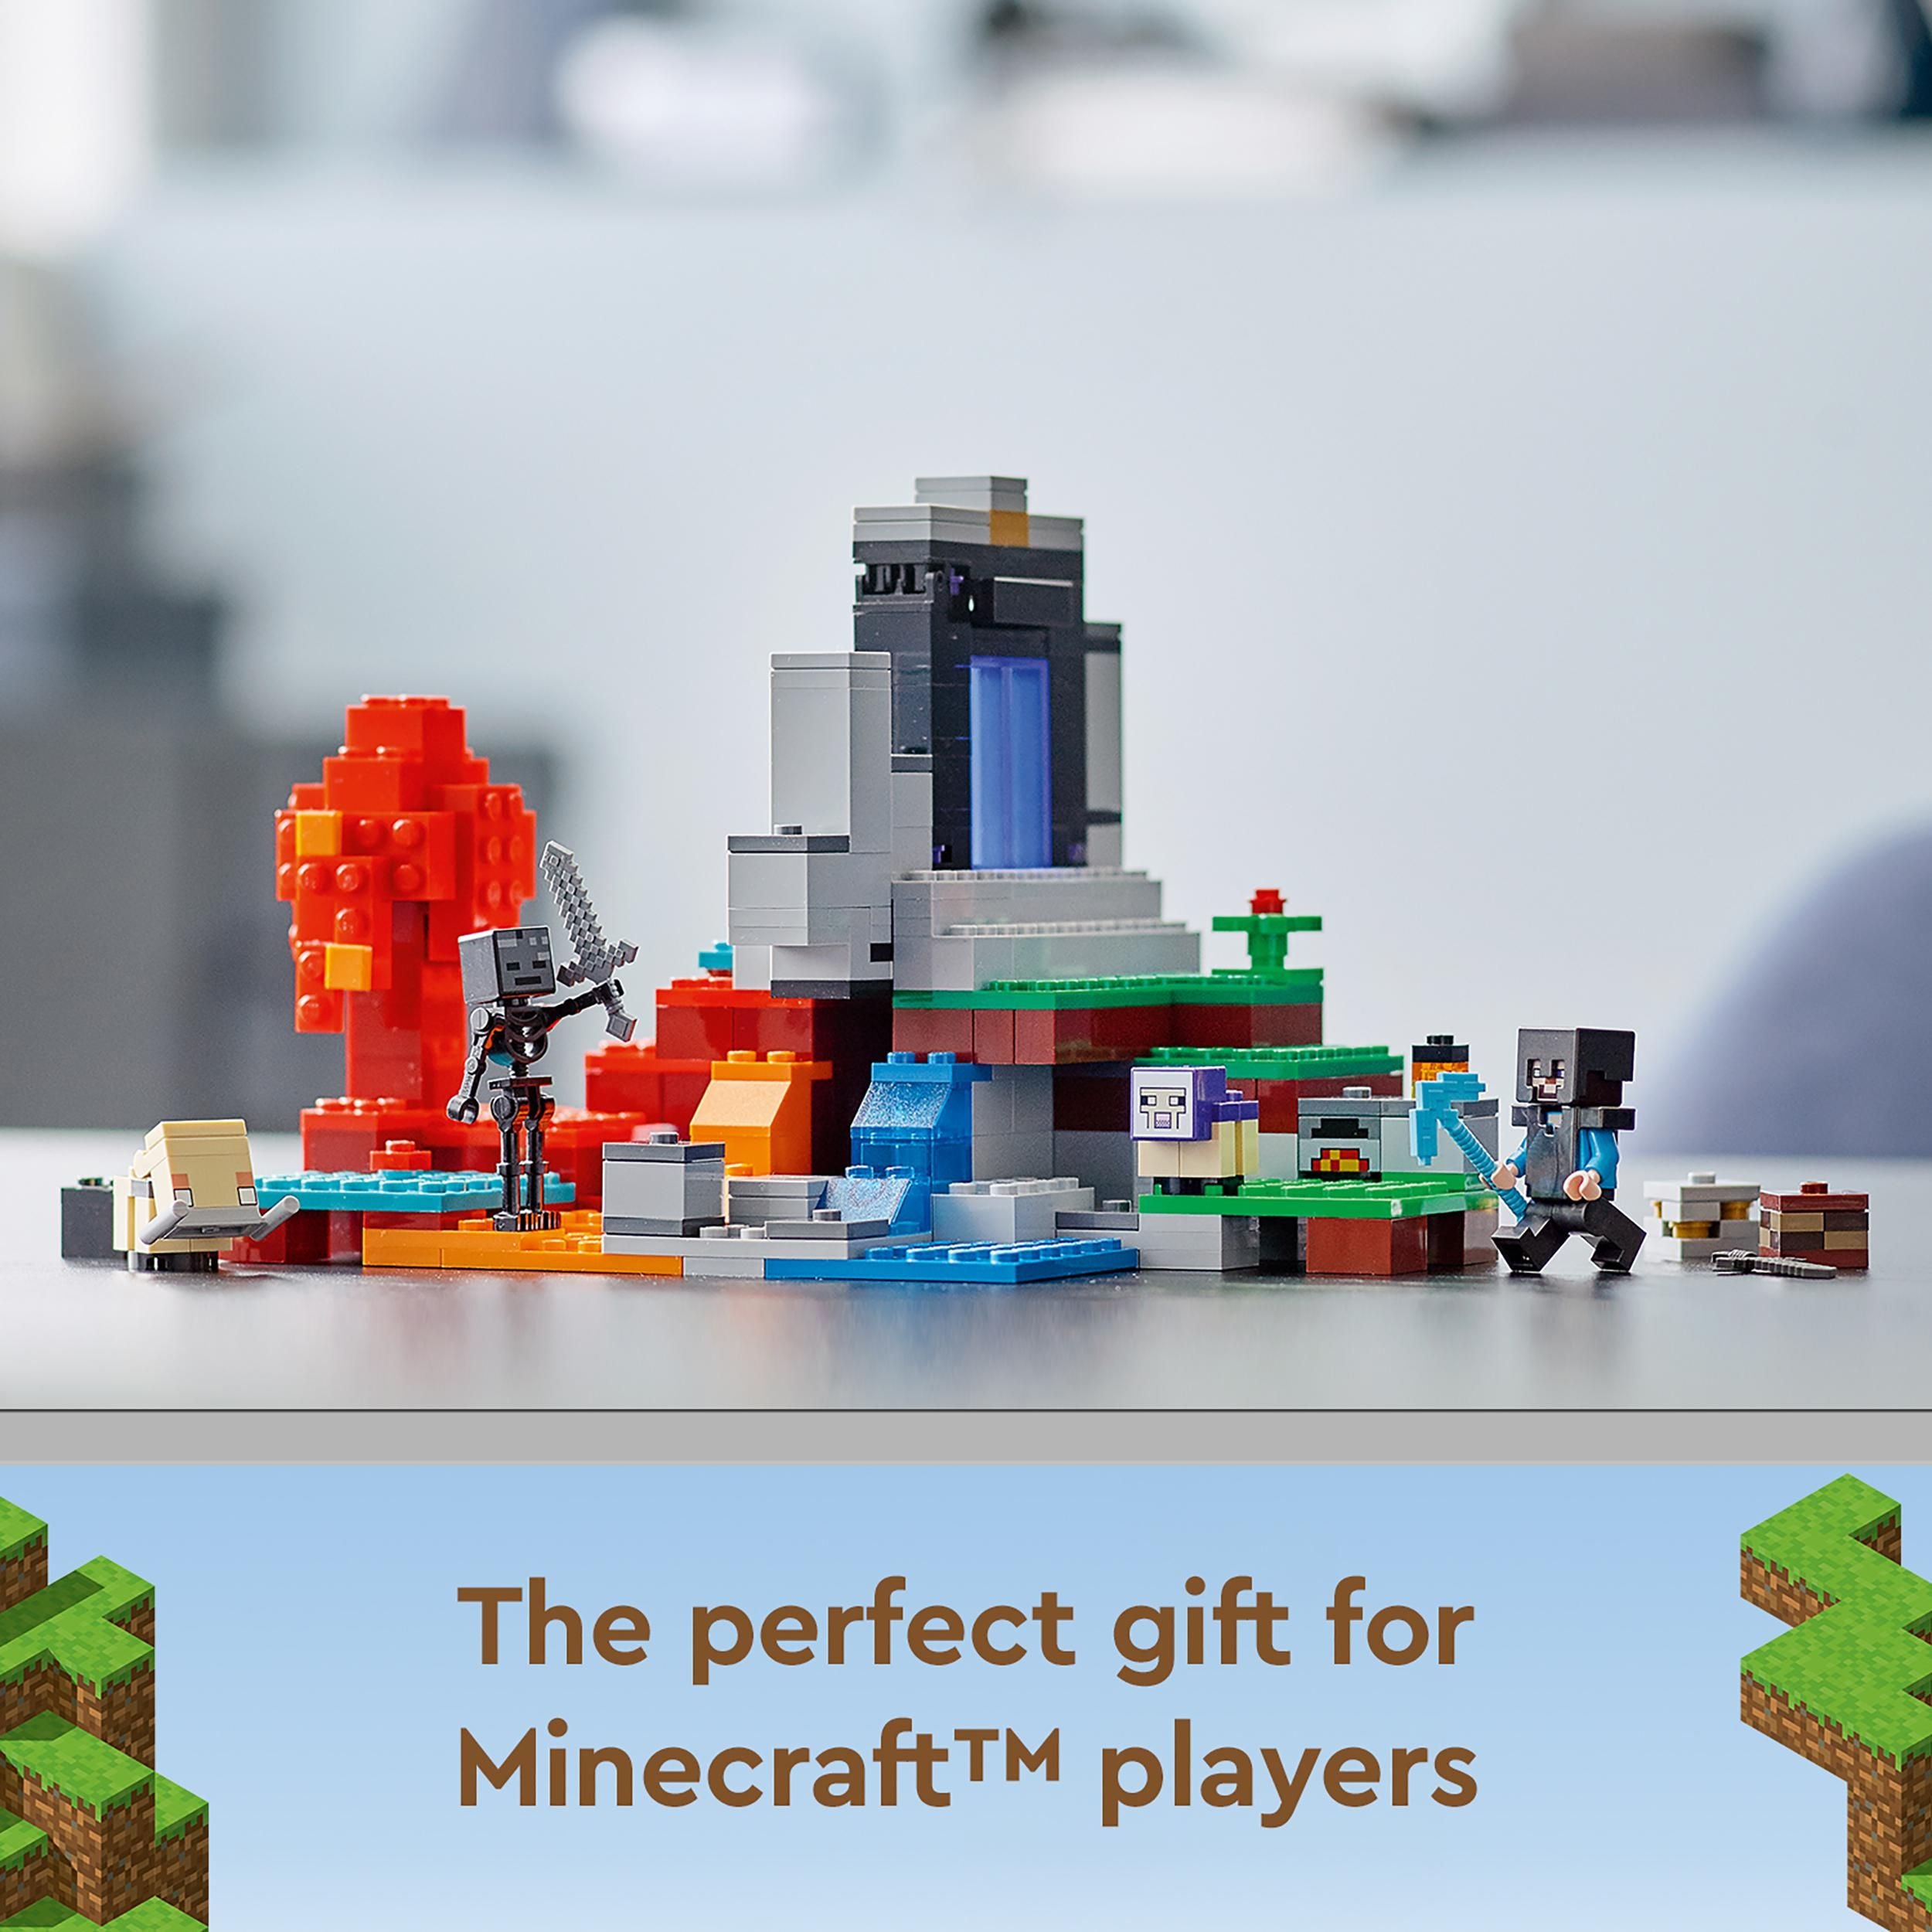 LEGO 21172 Minecraft The Ruined Portal Toy with Steve and Wither Skeleton Figures, Building Set for Kids 8 Years Old